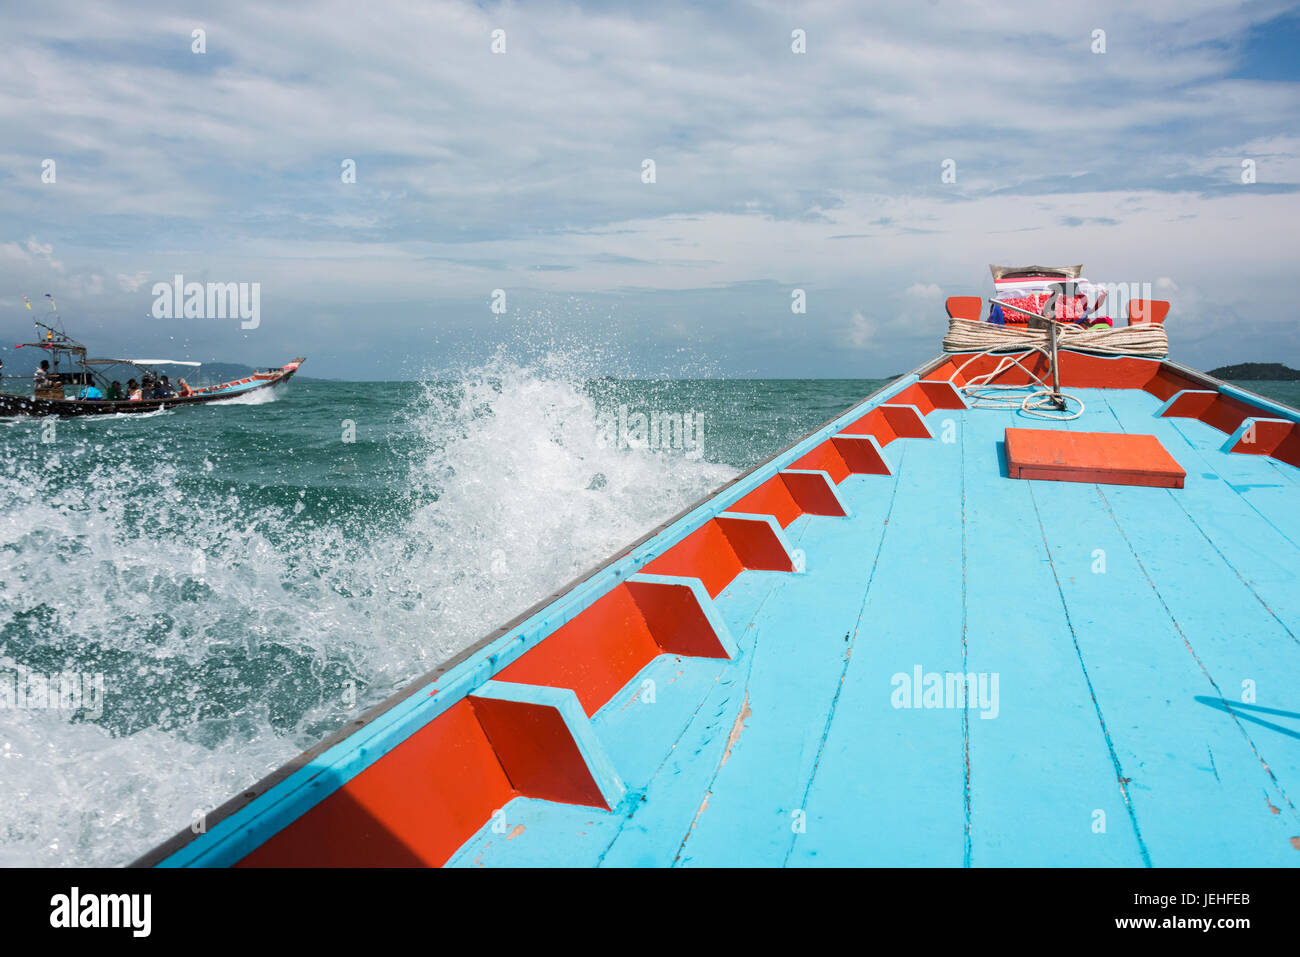 The colourful deck of a painted wooden boat splashing in the Gulf of Thailand with a boat carrying passengers traveling beside it Stock Photo